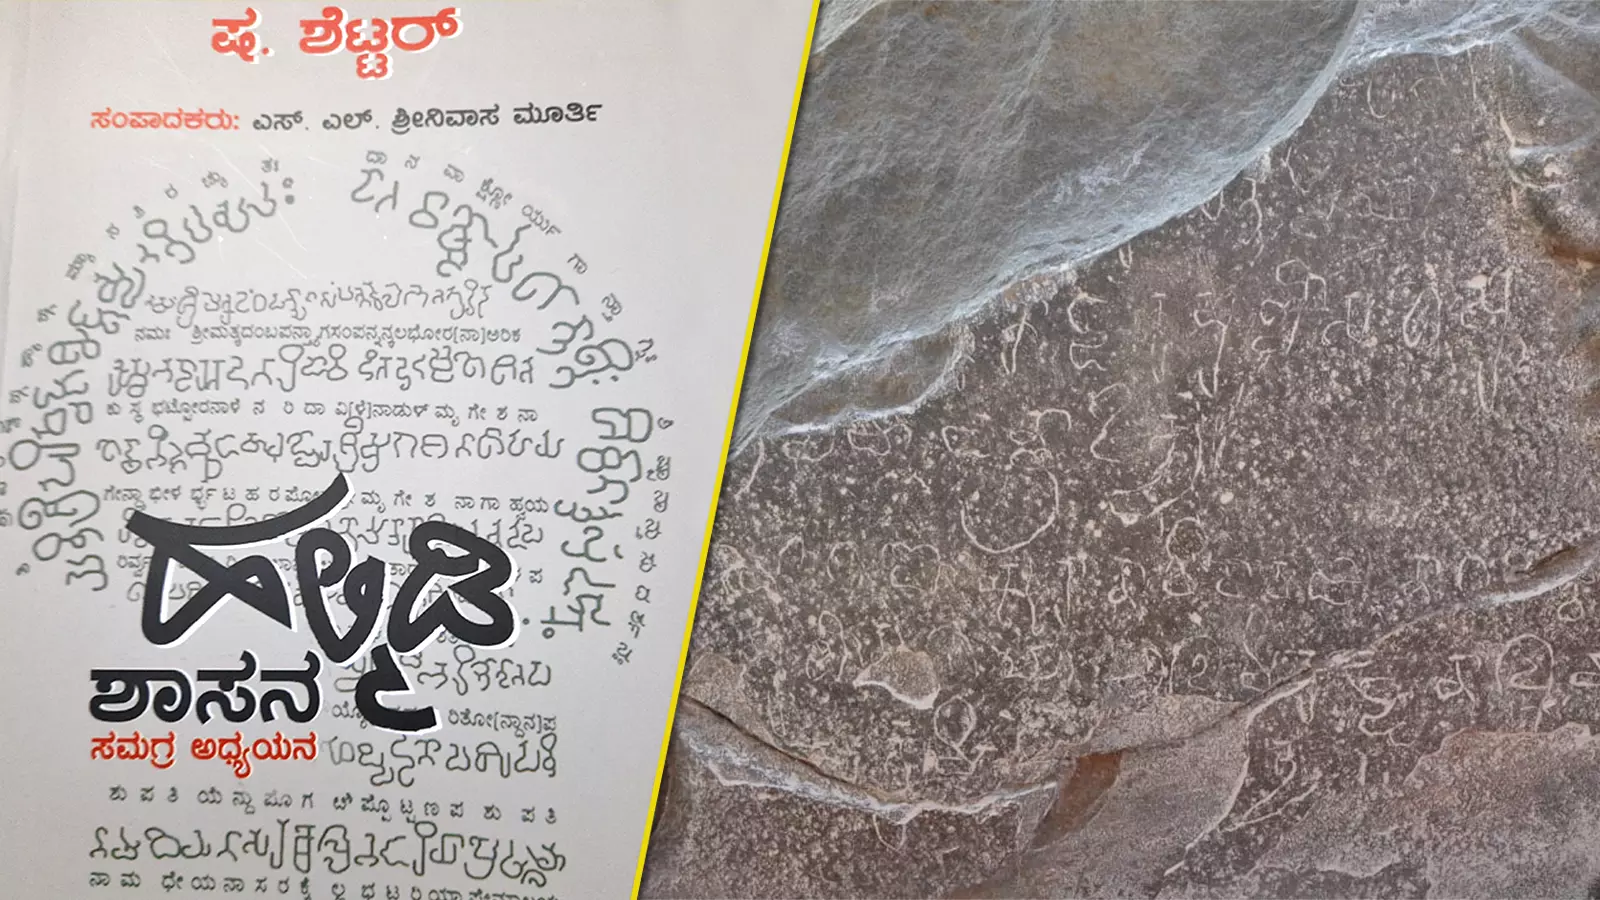 15 years after ‘classical’ tag, Kannada still cries for its place in the sun